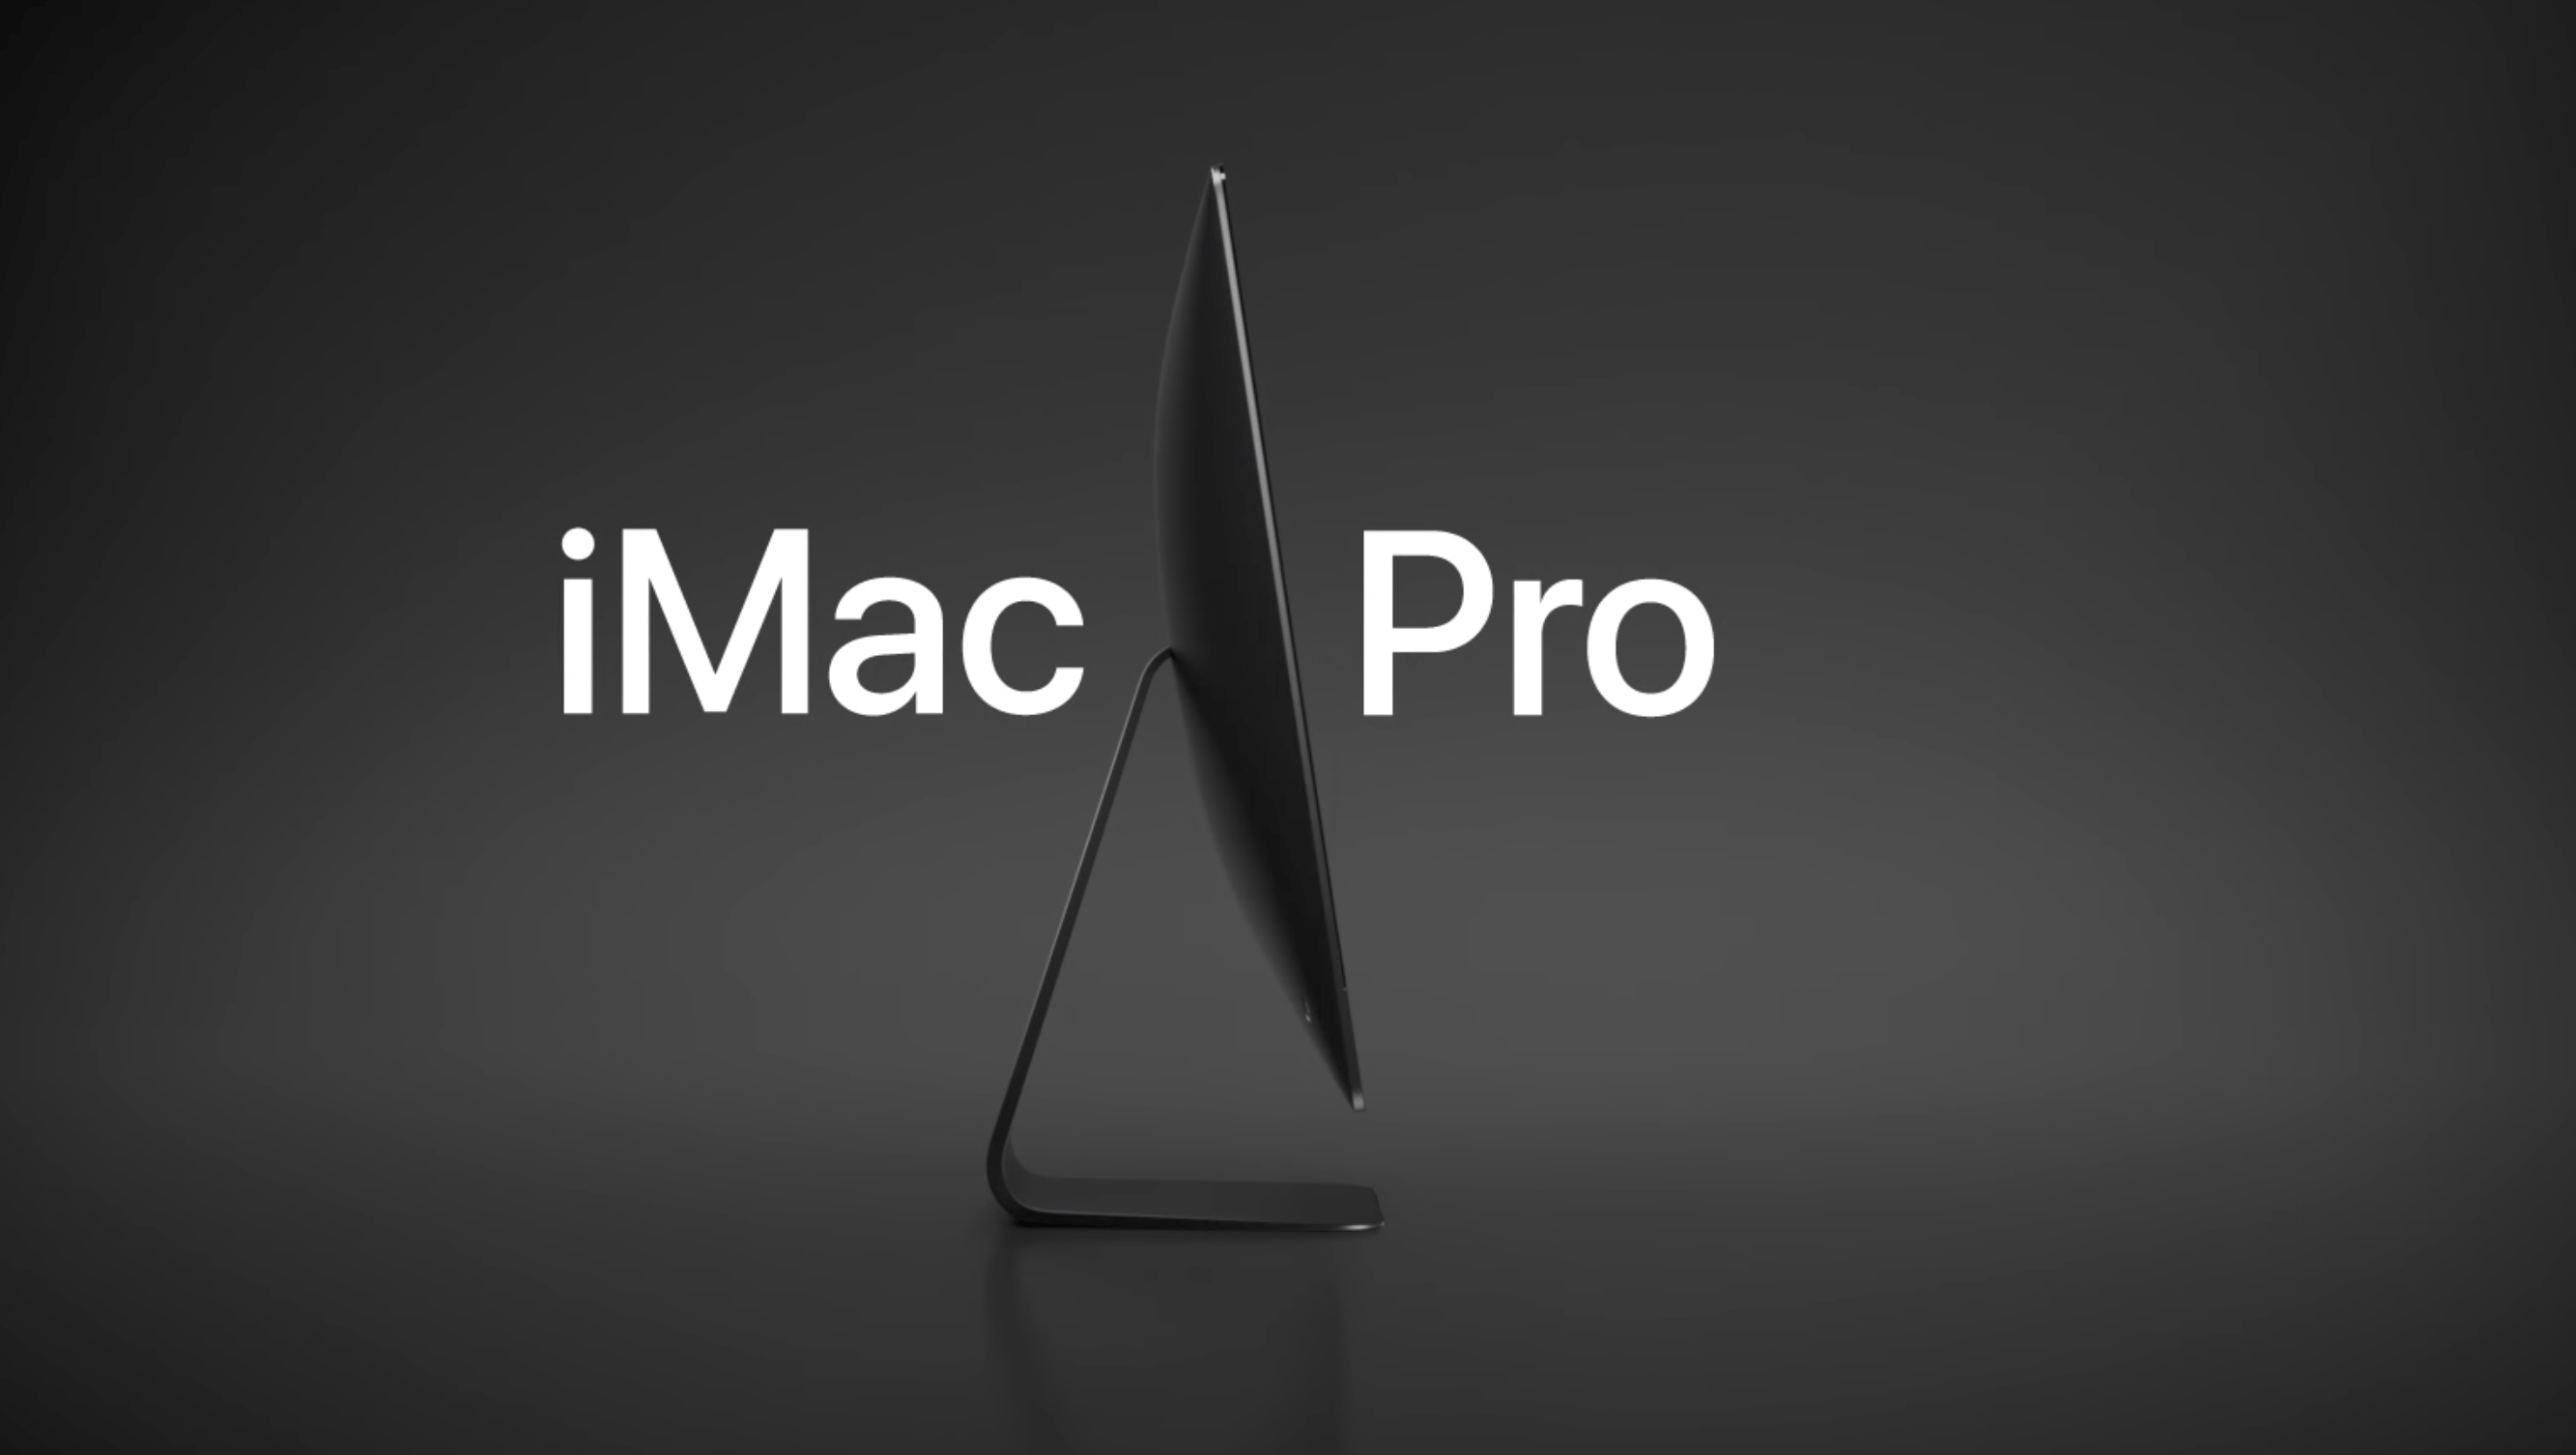 The new iMac Pro brings awesome firepower to the desktop this December.